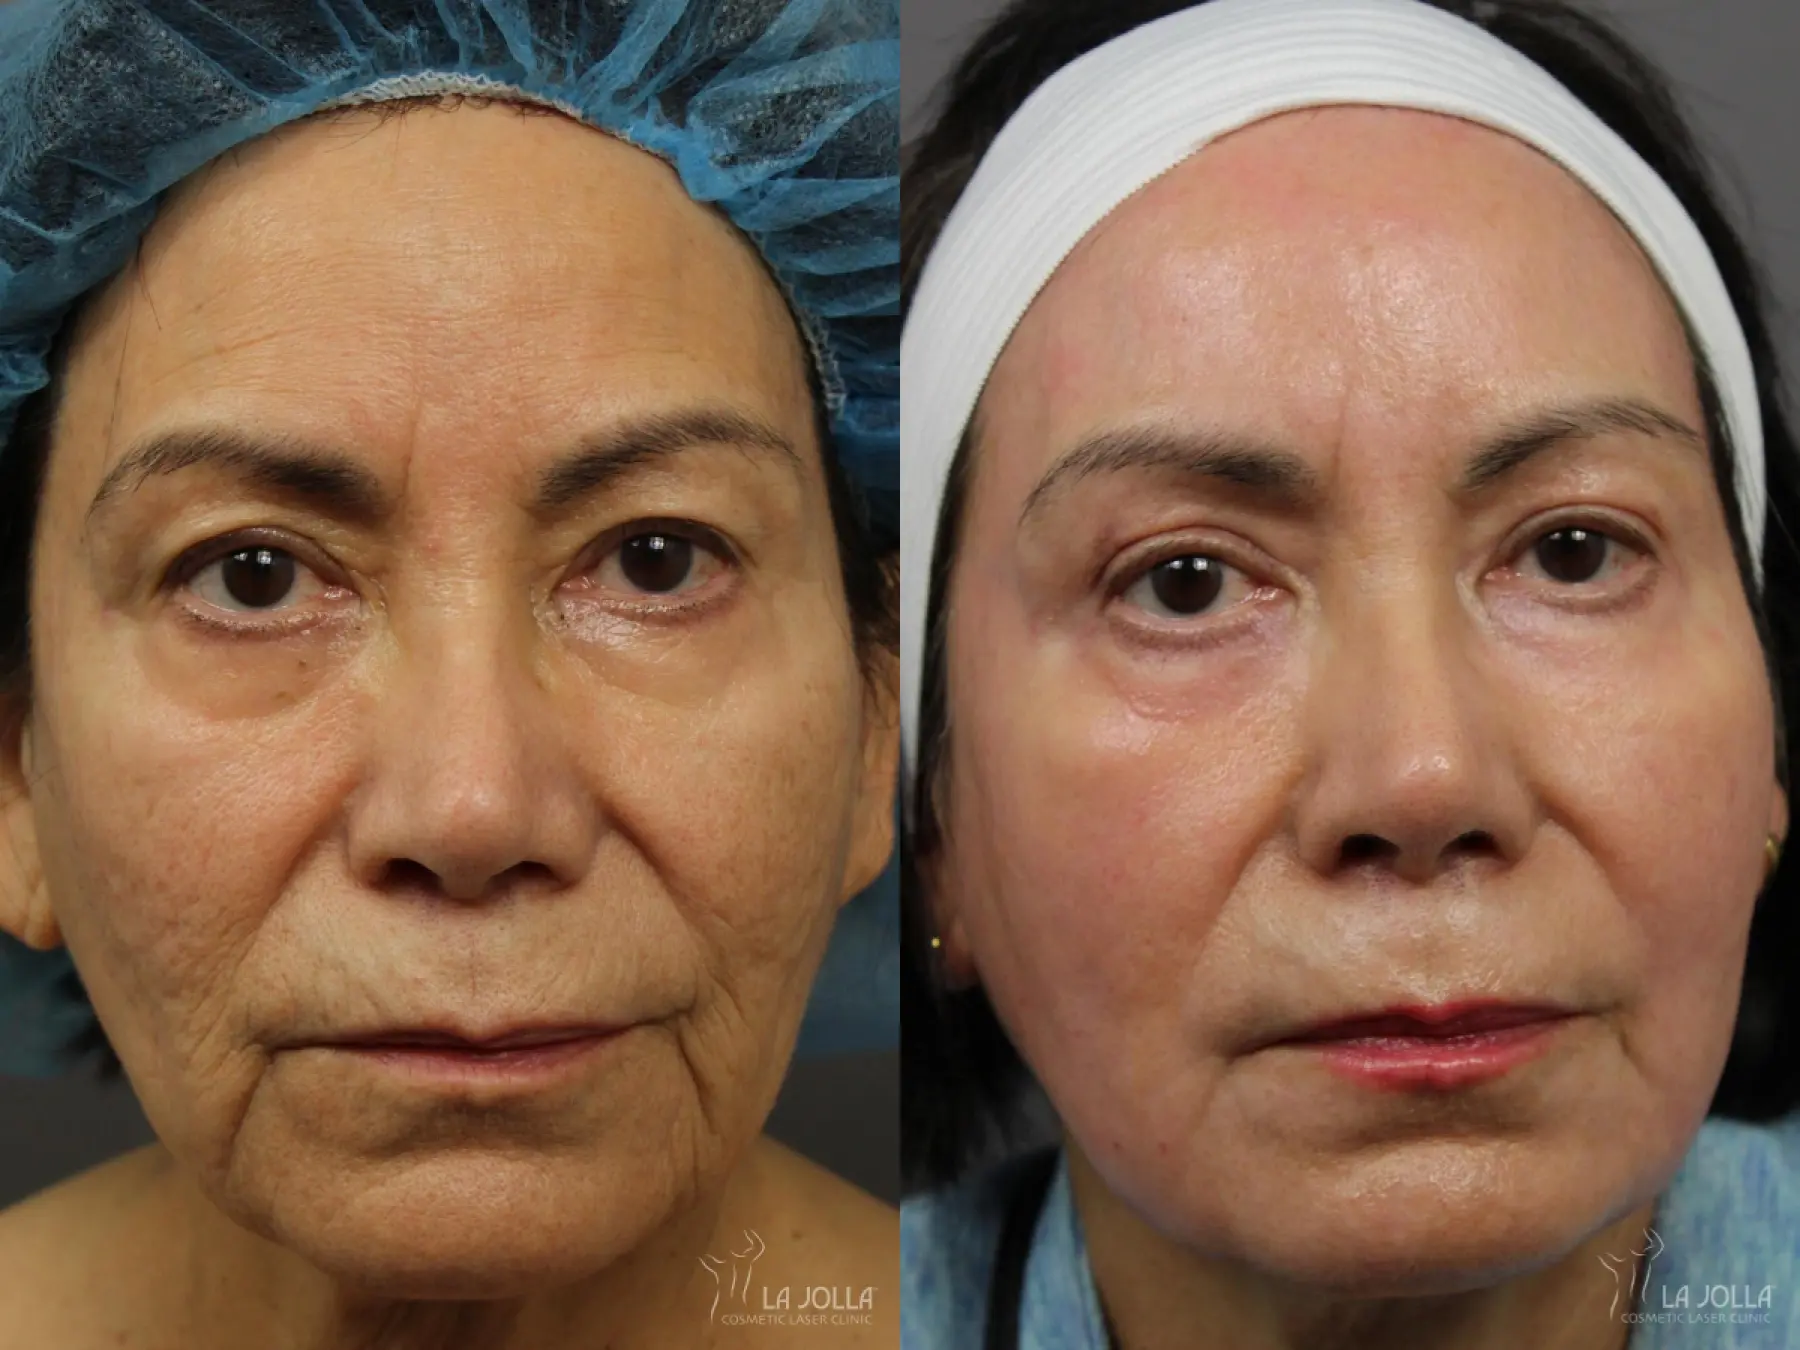 CO2 Laser: Patient 1 - Before and After 3